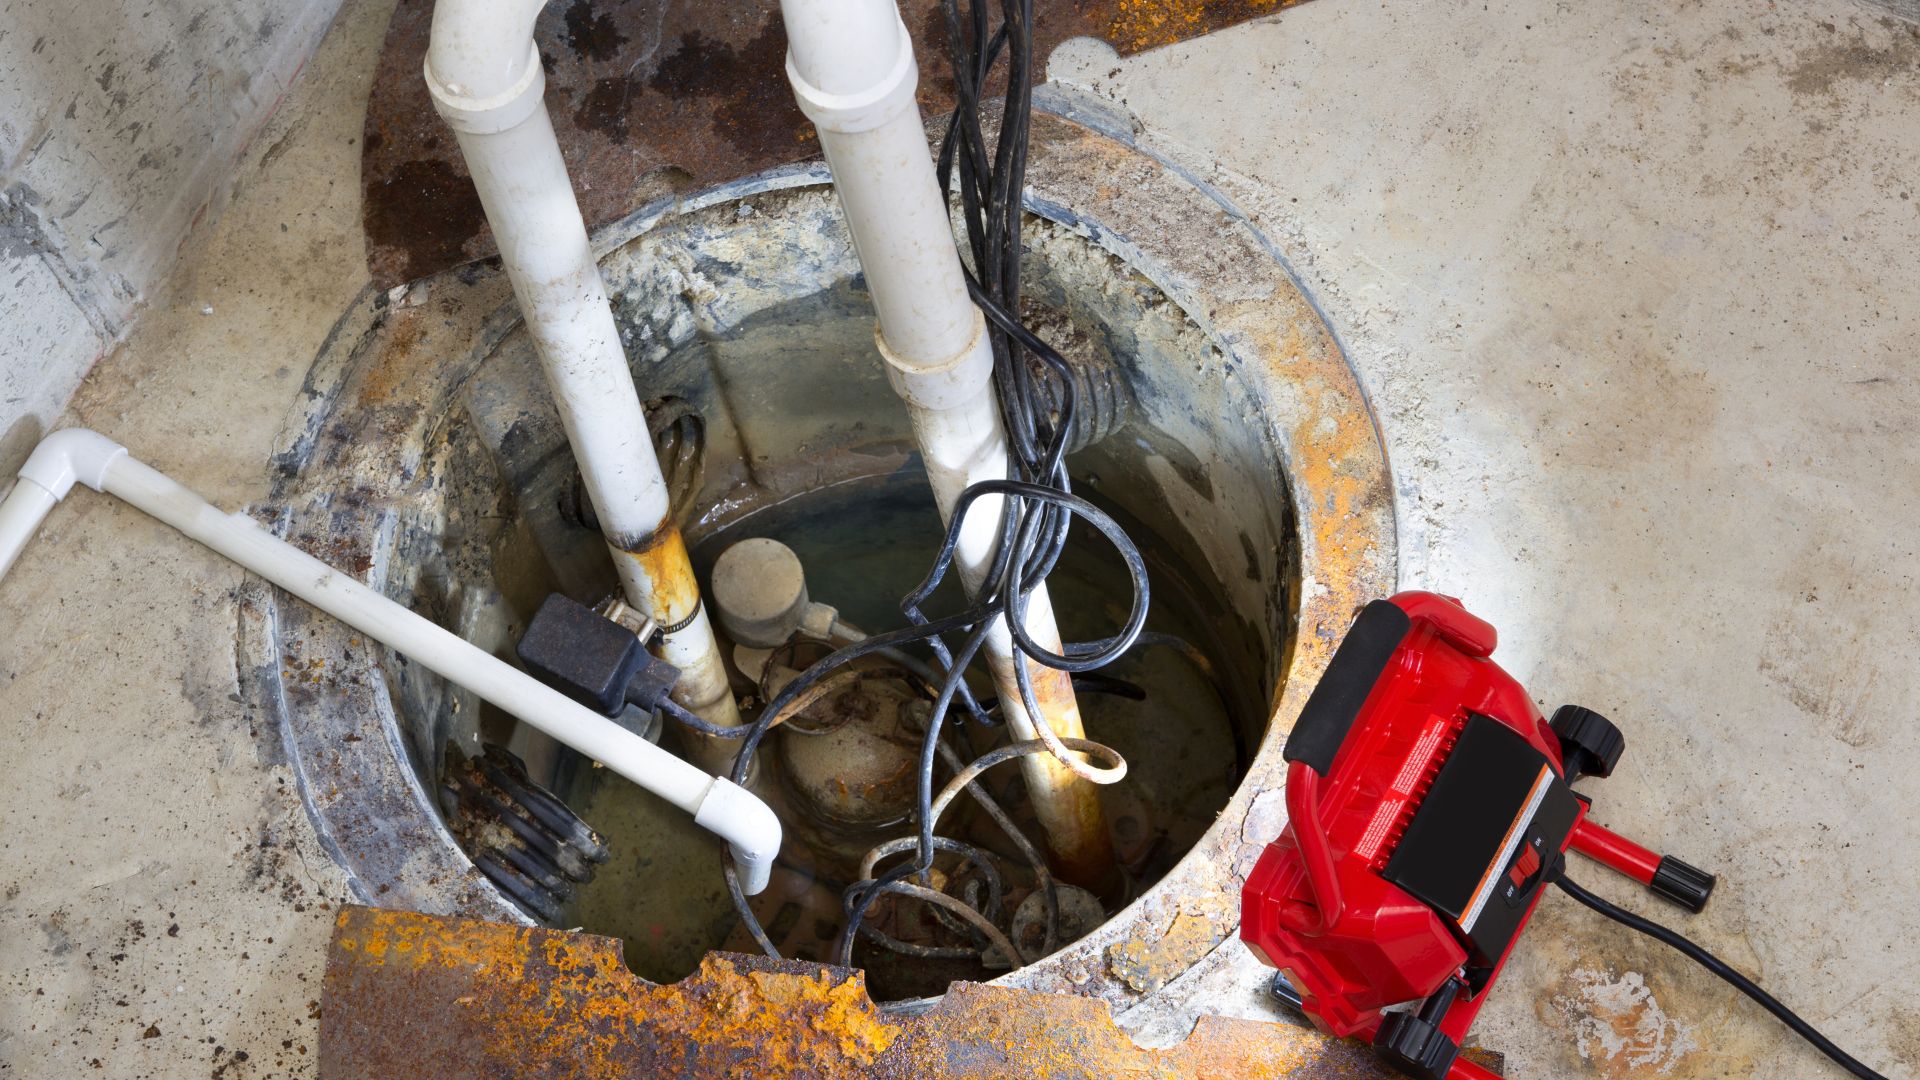 Reach Out to CAN Plumbing & Drainage for Expert Plumbing Drain Services